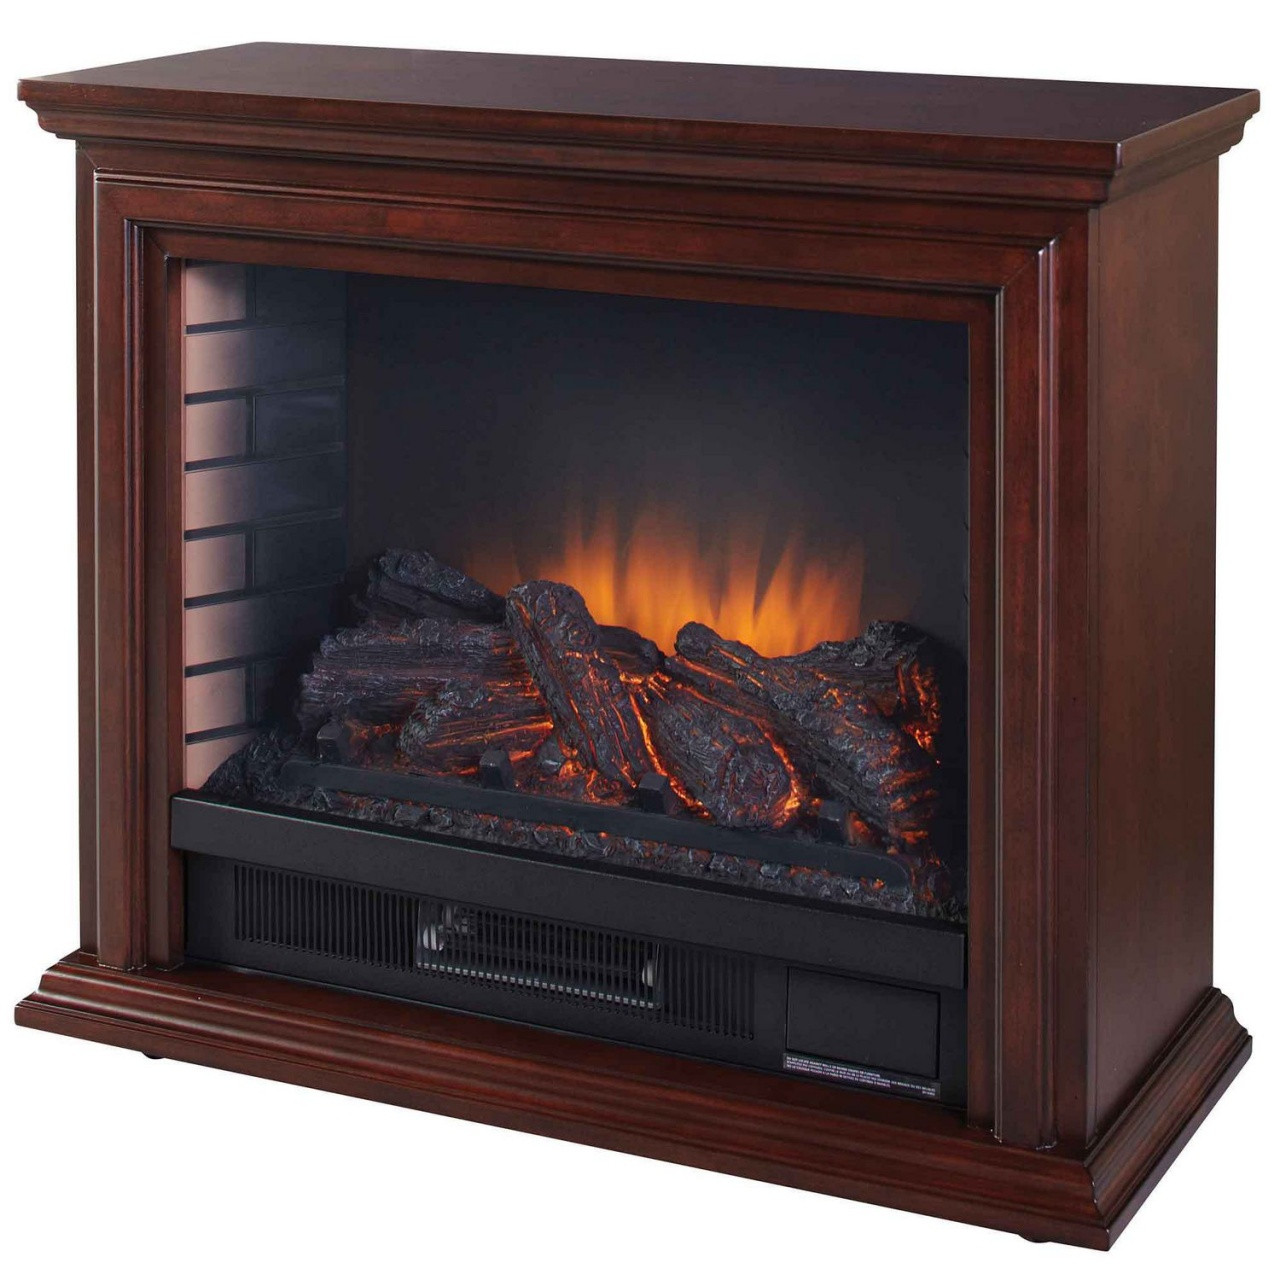 Electric Fireplace Insert At Lowes
 Electric Fireplace Insert at Lowes – FIREPLACE IDEAS